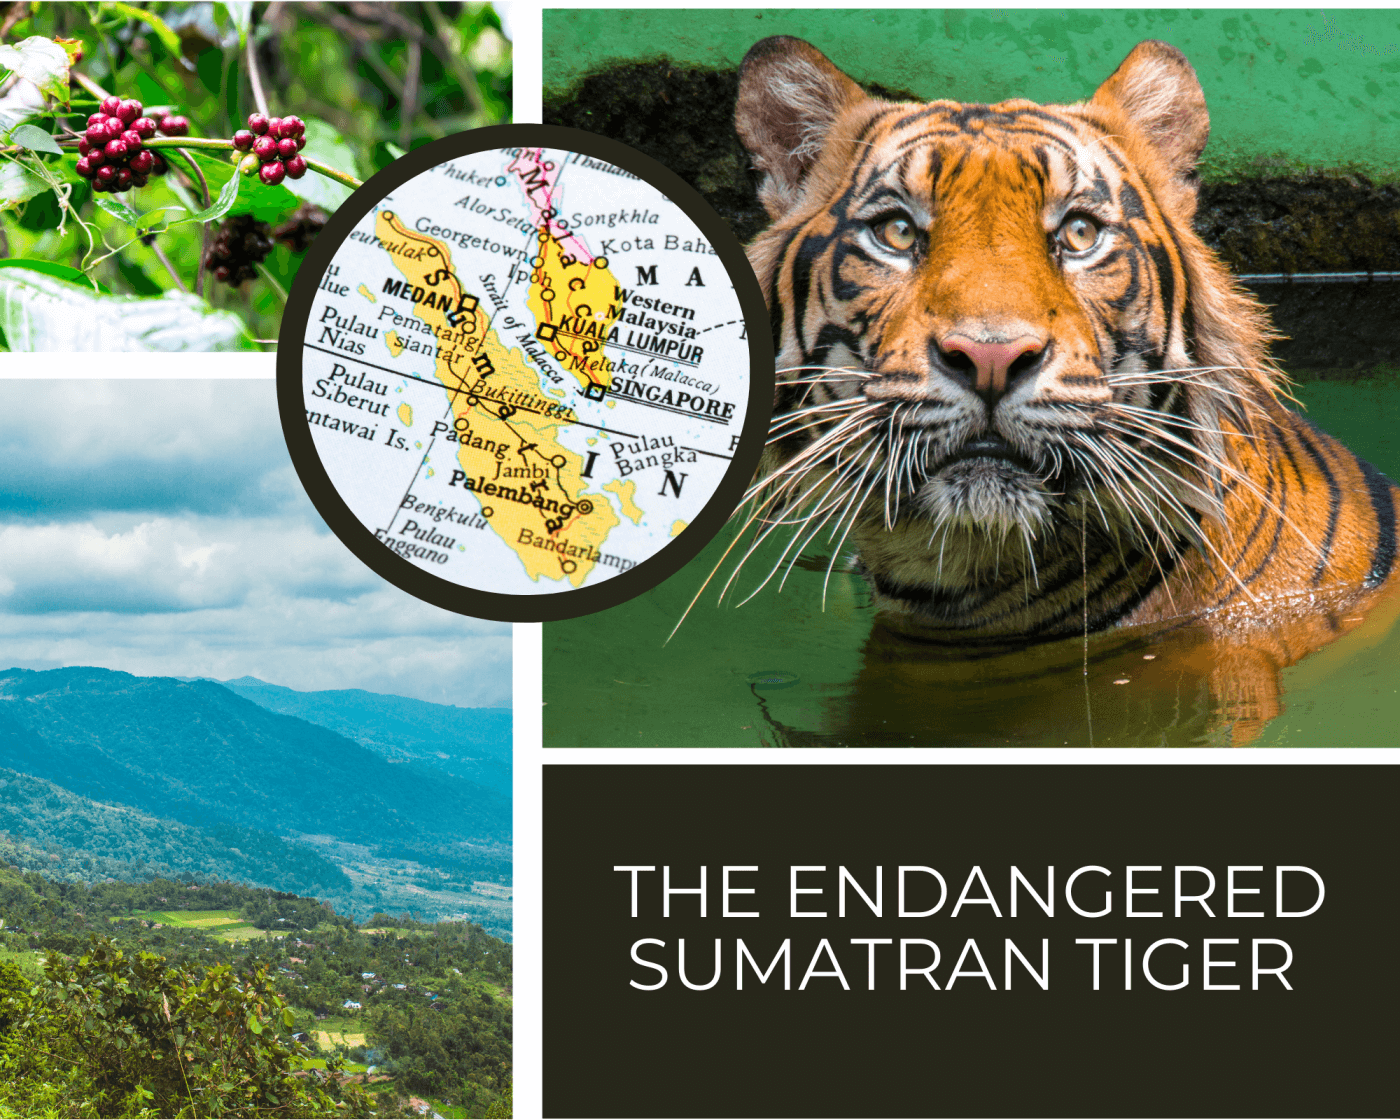 In the top left is a coffee plant. In the bottom right is a picture of the Sumatra landscape. On the top right is a tiger, and in the bottom right it says the endangered sumatran tiger. In the center is Sumatra on a map.